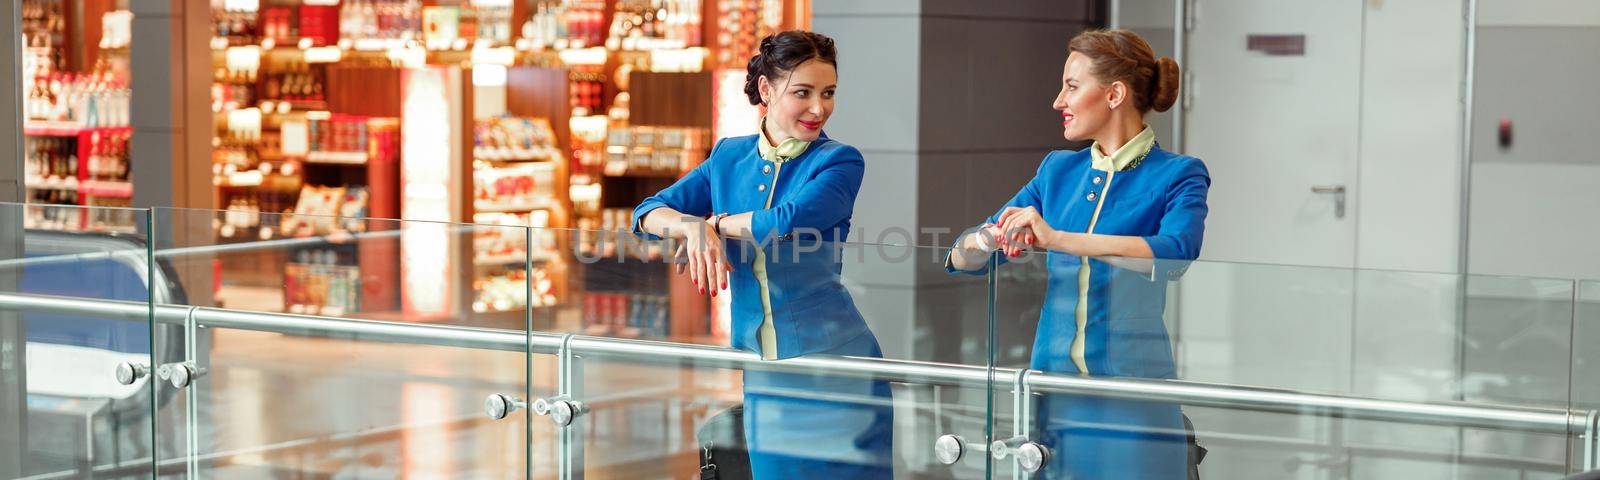 Women stewardesses in aviation air hostess uniform talking and smiling while standing near travel bags in passenger departure terminal